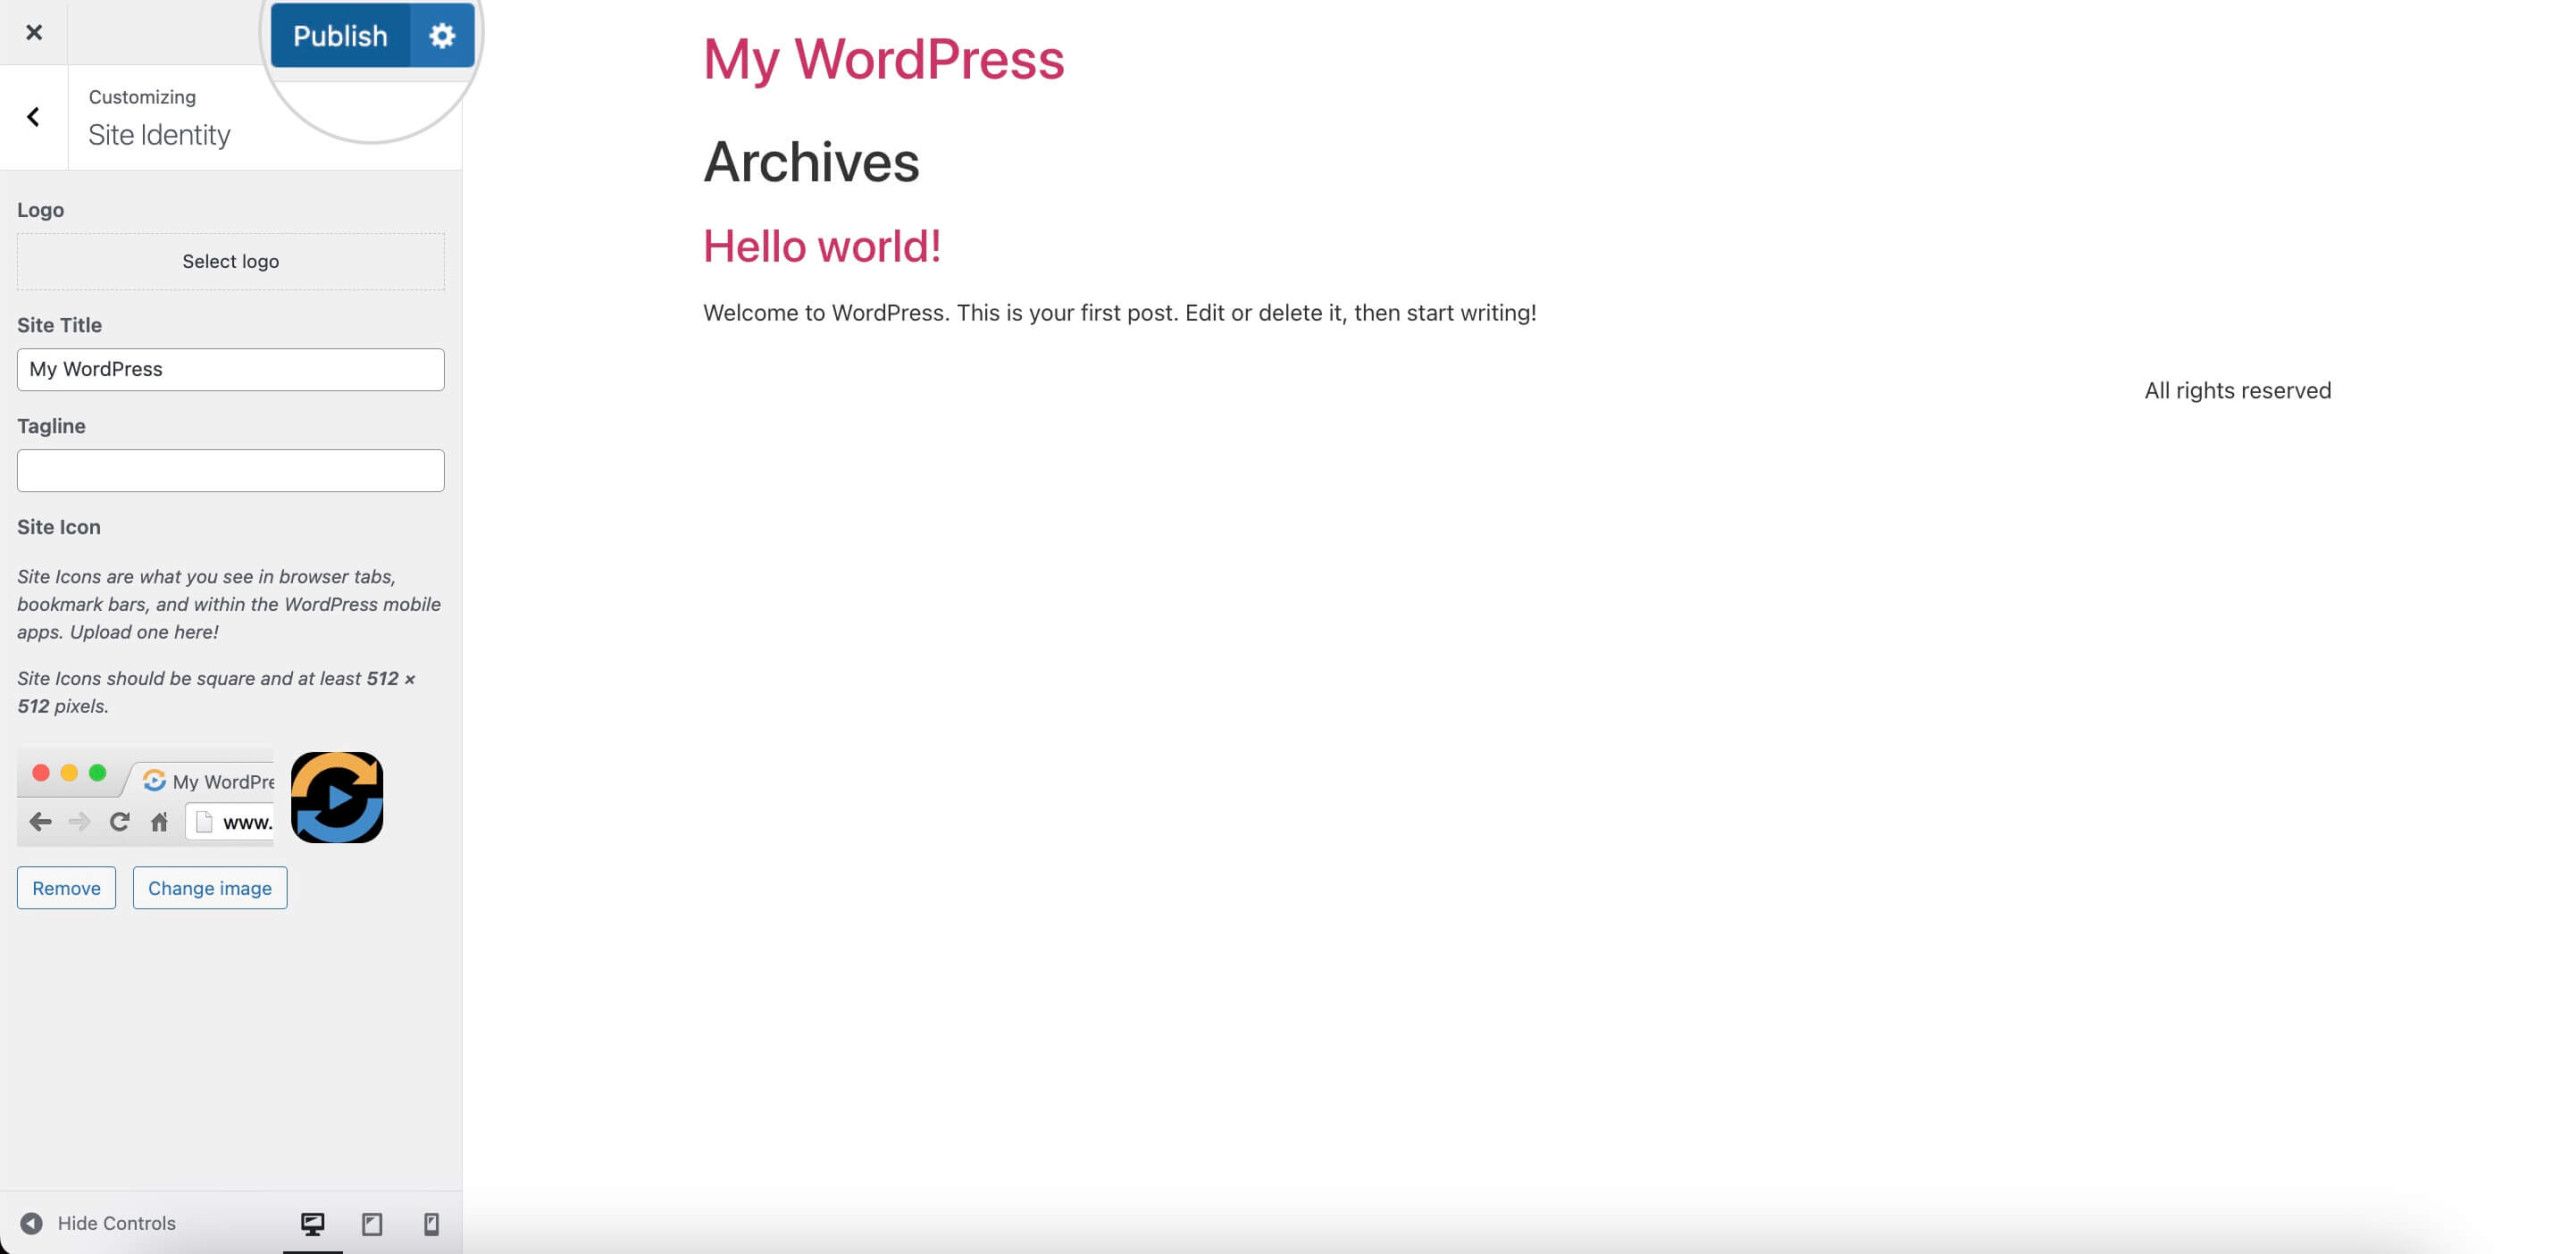 Screenshot displaying the Publish button to save your uploaded WordPress site icon